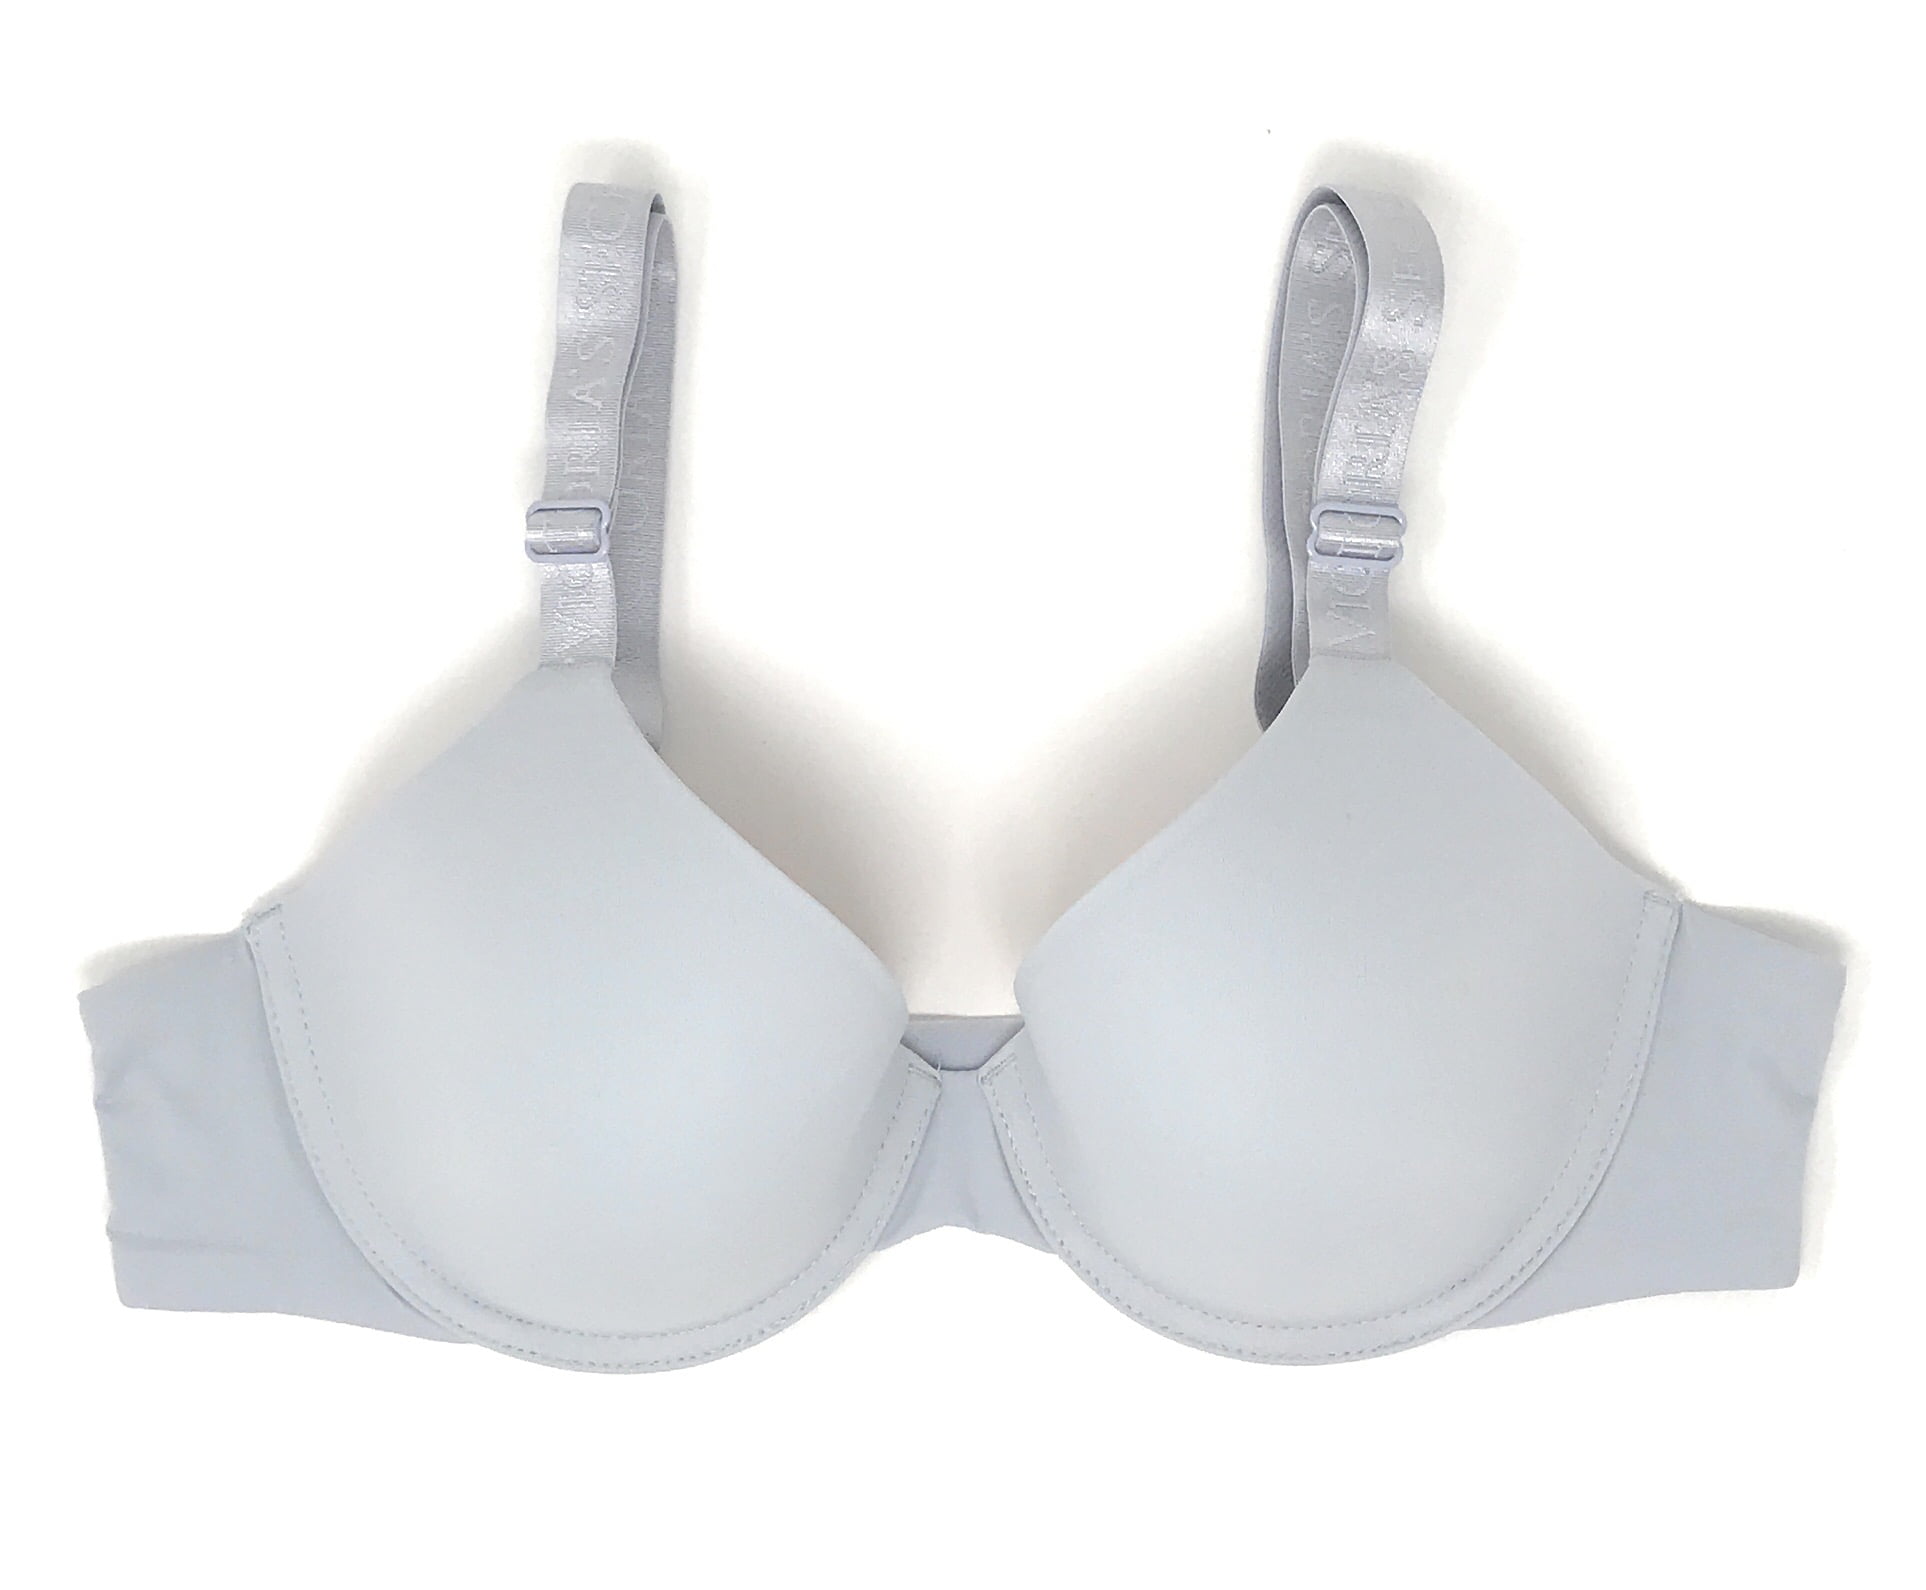 Victoria's Secret White Lined Demi Bra 36D Size 36 D - $9 (82% Off Retail)  - From Adriana